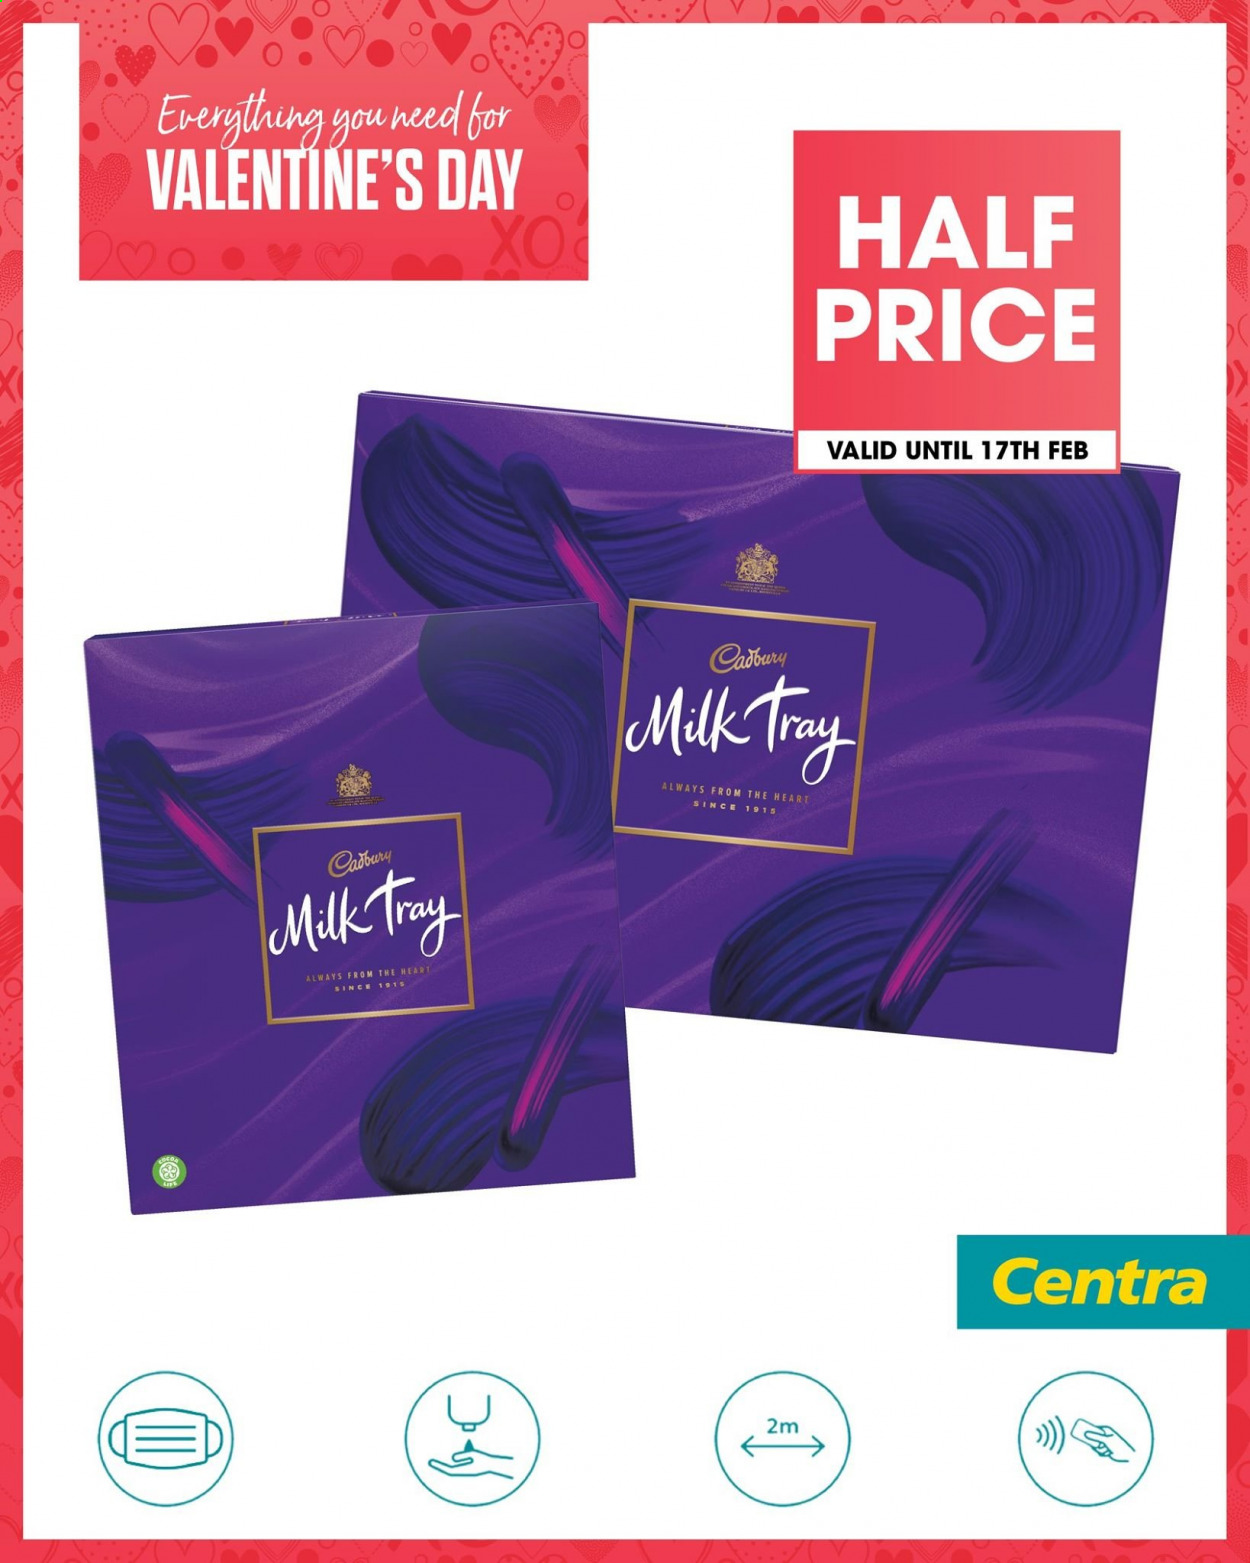 thumbnail - Centra offer  - 11.02.2021 - 17.02.2021 - Sales products - Milk Tray, Cadbury. Page 1.